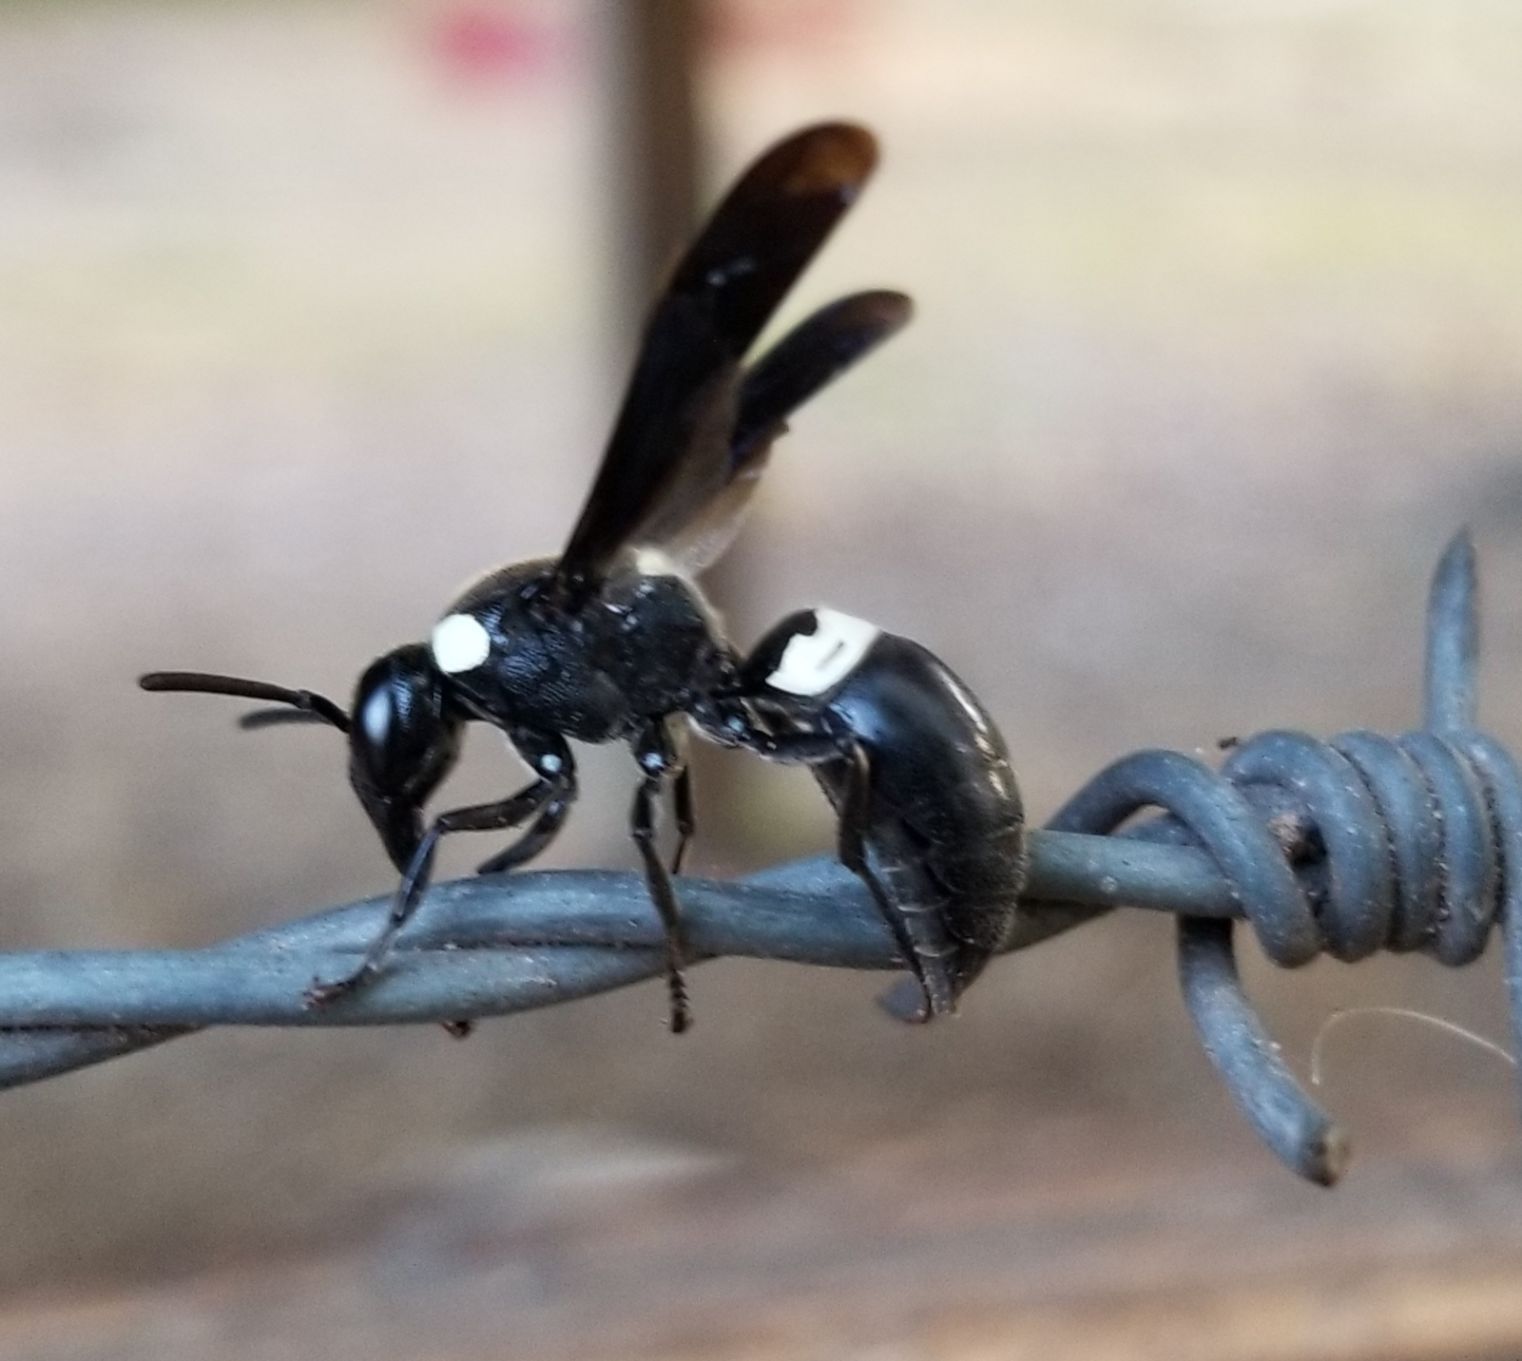 very small black wasp with white stripes lives in ground